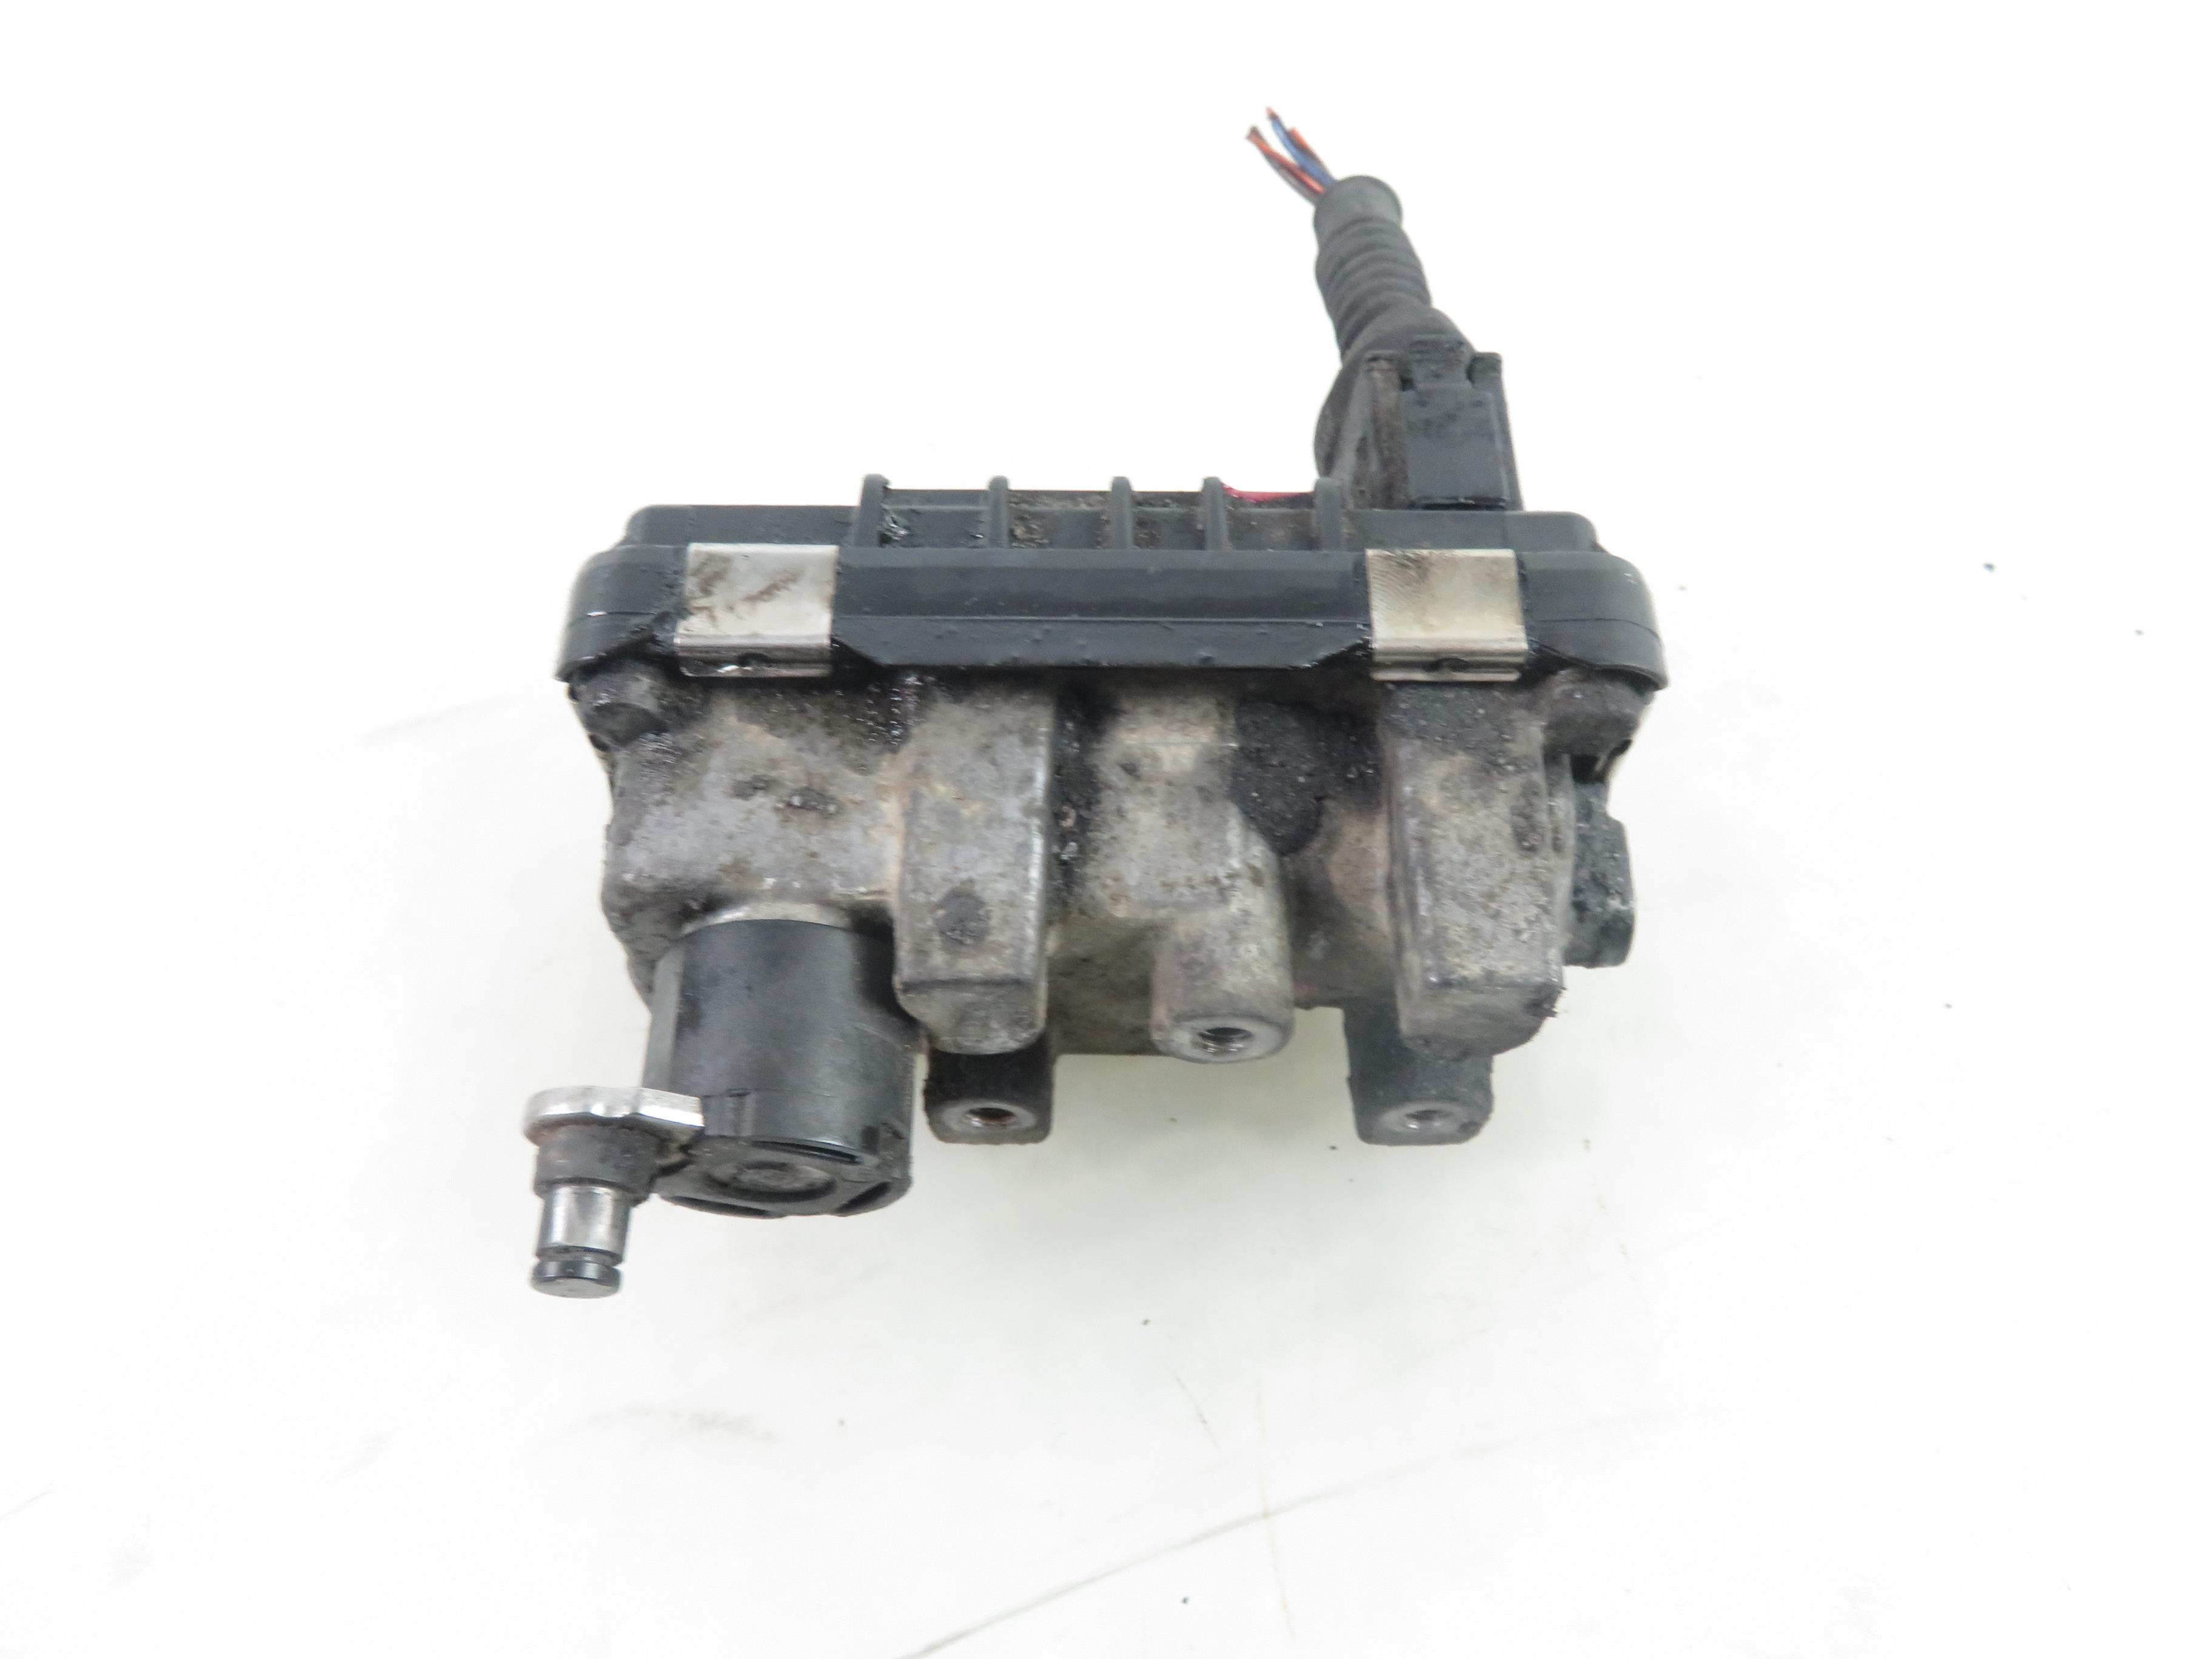 VOLKSWAGEN Touareg 1 generation (2002-2010) Electrical Turbocharger Control 6NW008412712120 24840368